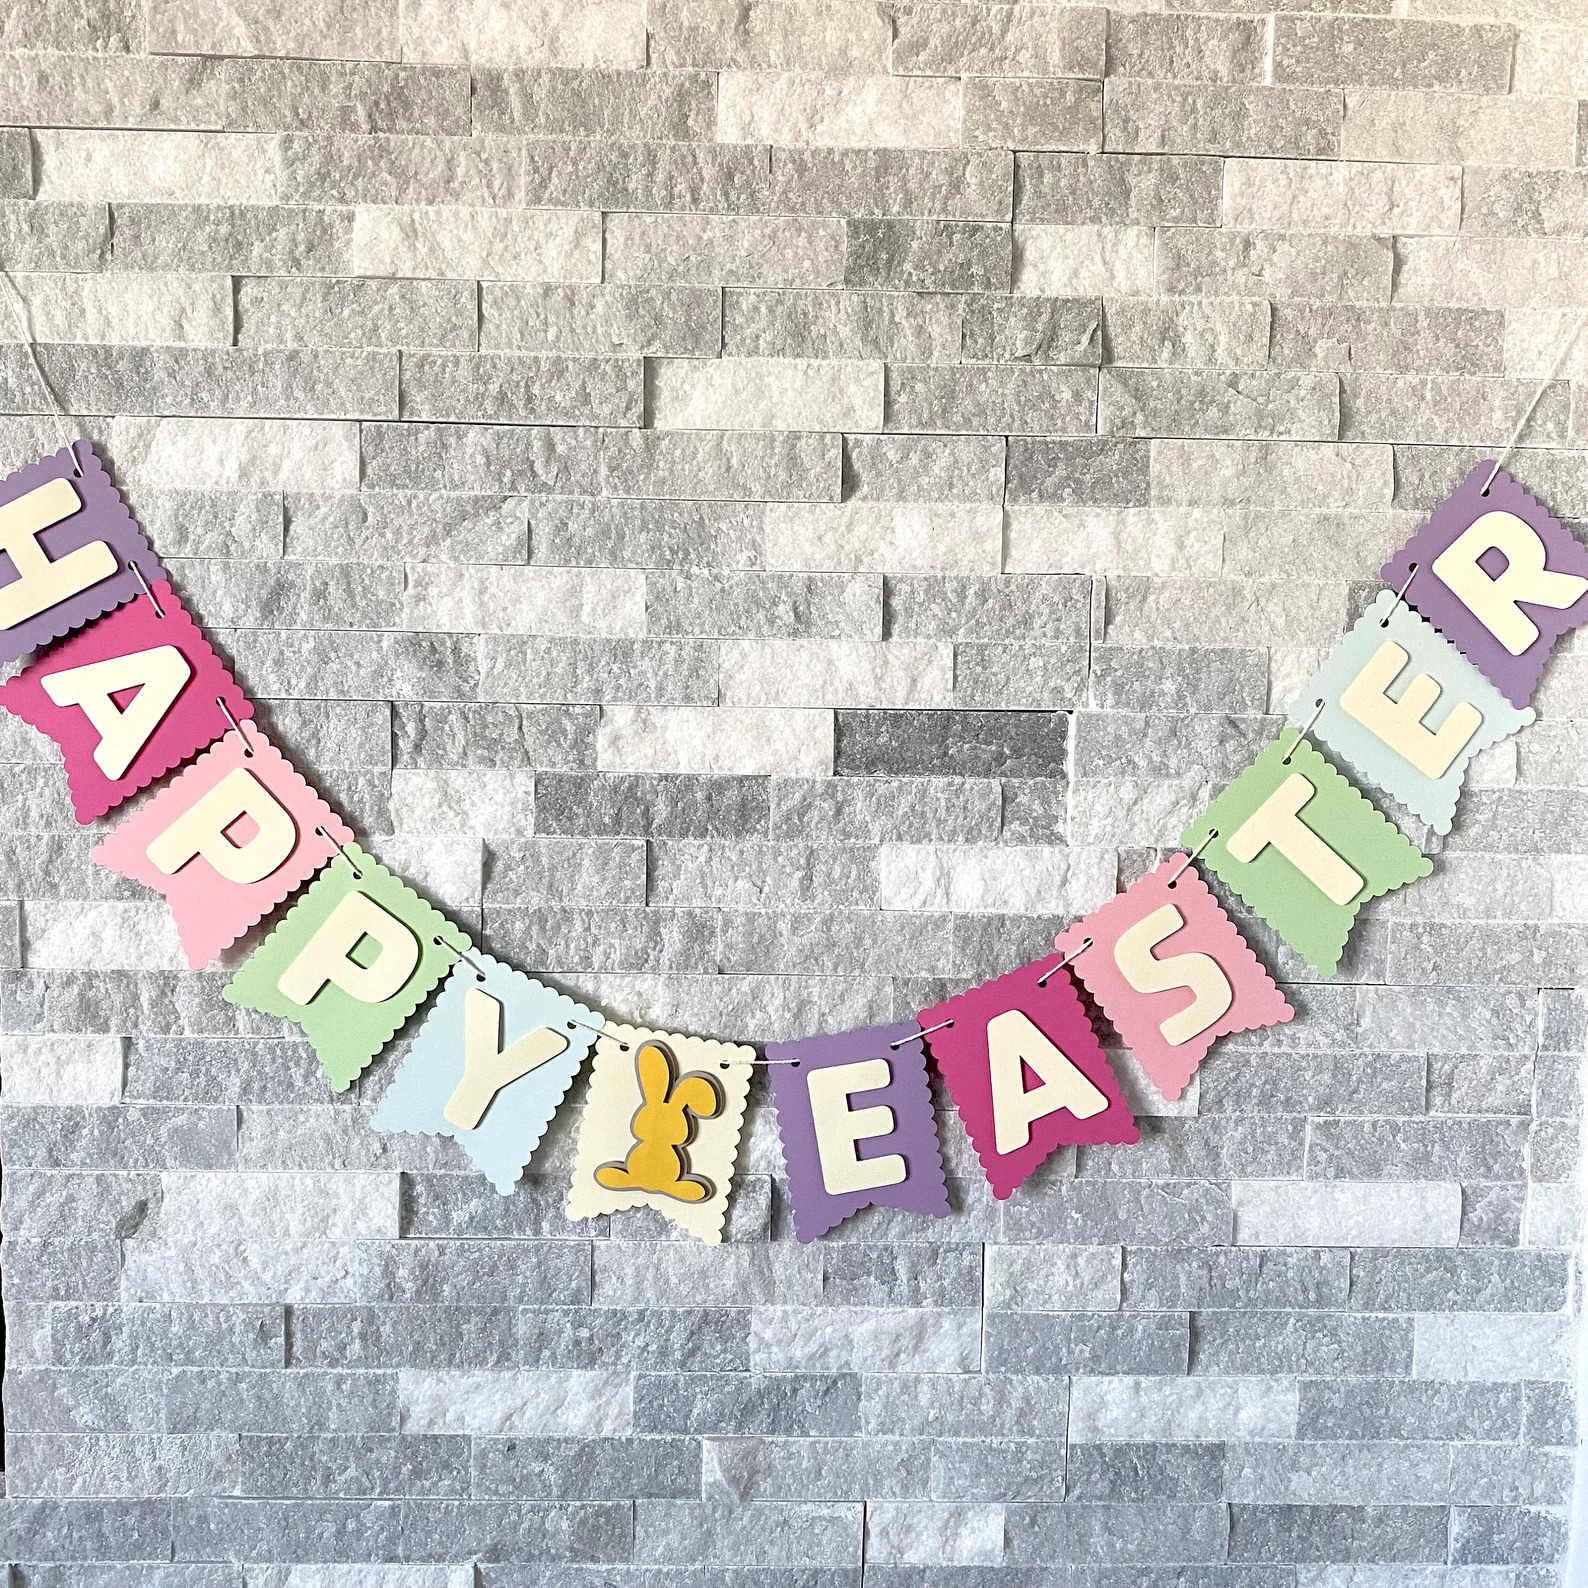 15 Inspiring Easter Banner Designs to Get You in the Spirit